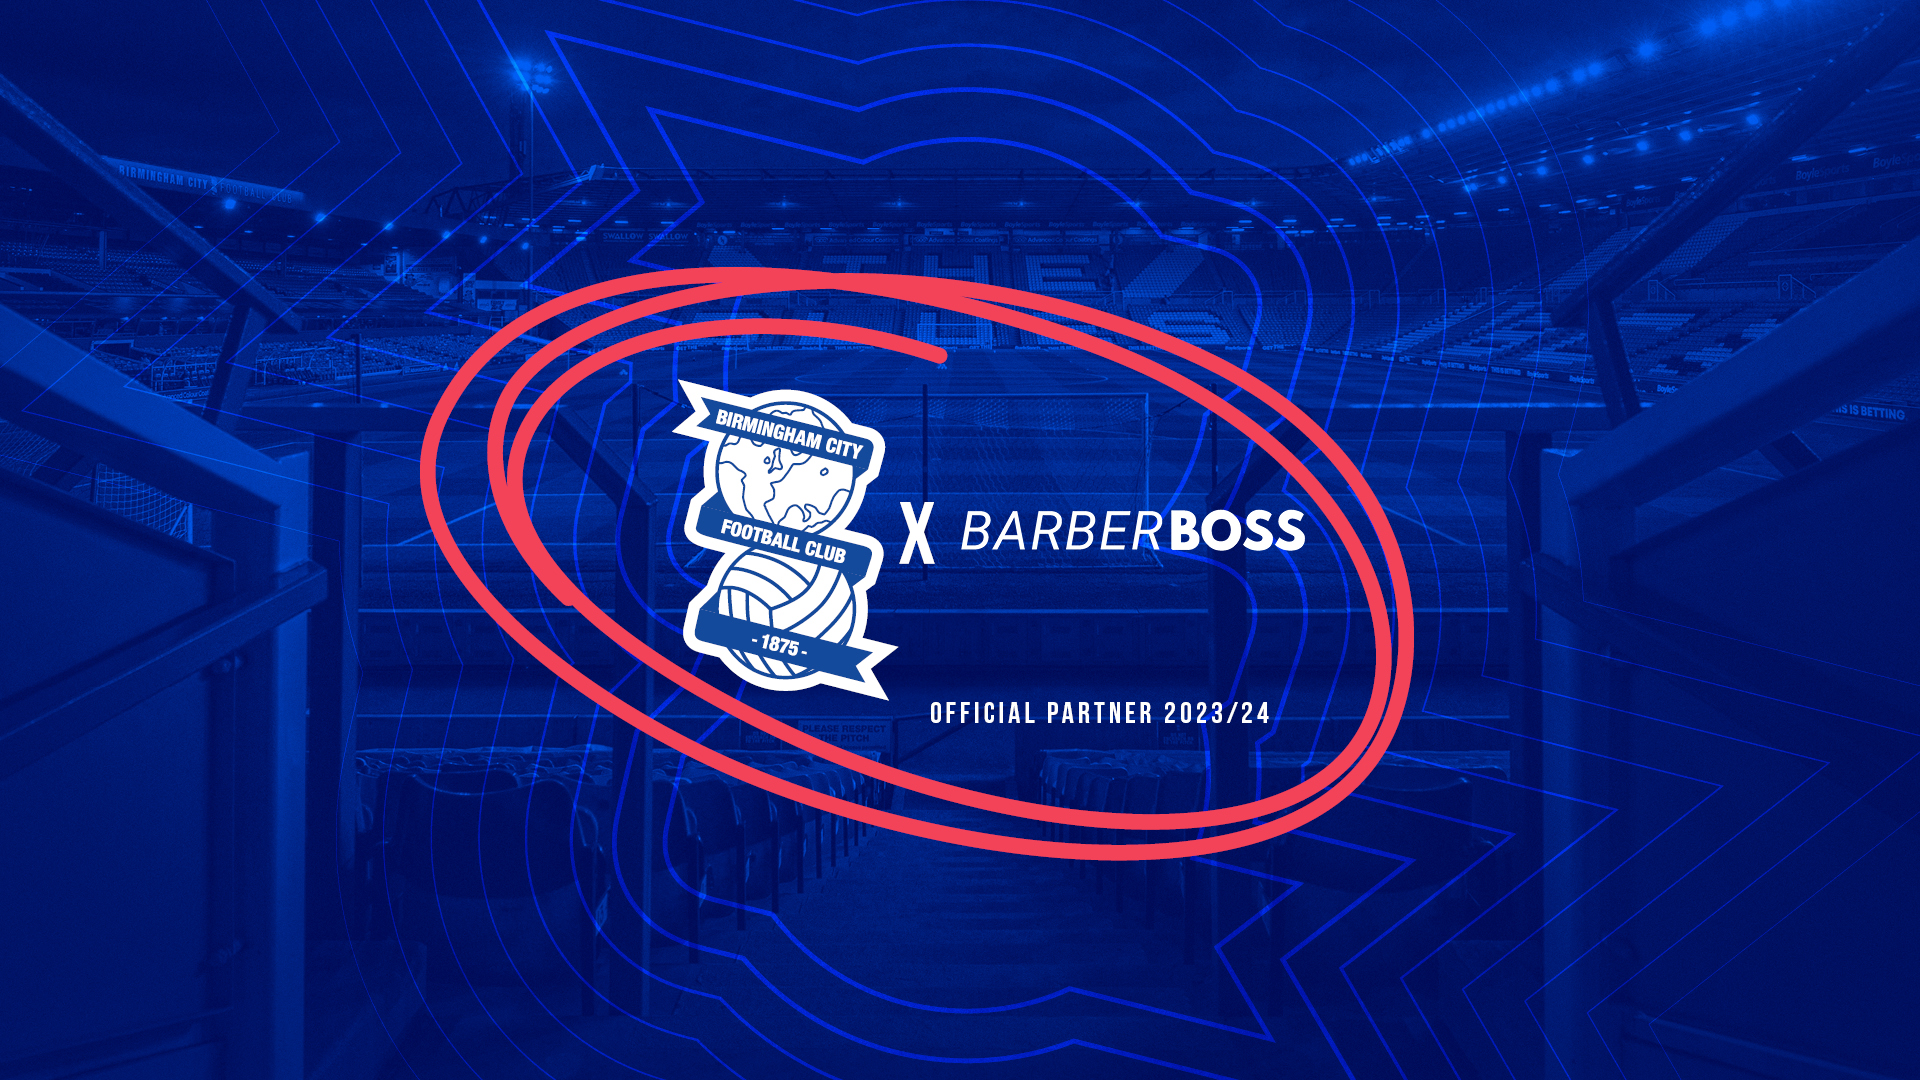 The Perfect Trim Meets The Perfect Goal: BarberBOSS and Birmingham City FC Kick Off a Game-Changing Partnership